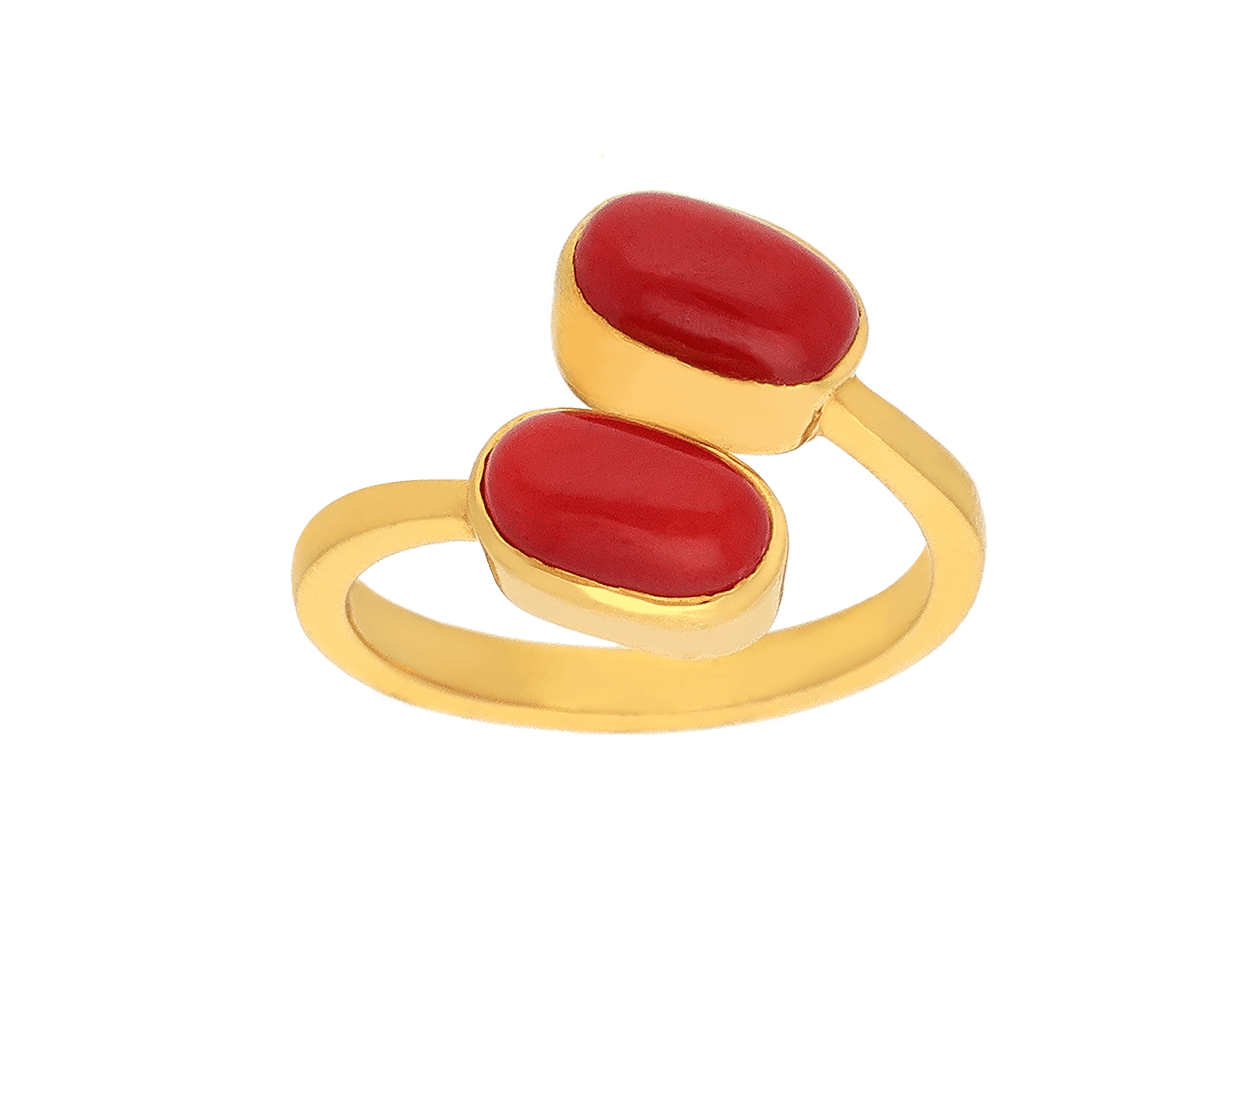 Marquise Red Coral Ring in 14k Gold, Coral Gold Ring, Birthstone Ring, Coral  Jewelry, March Birthstone Ring, Personalized Gift for Mom - Etsy